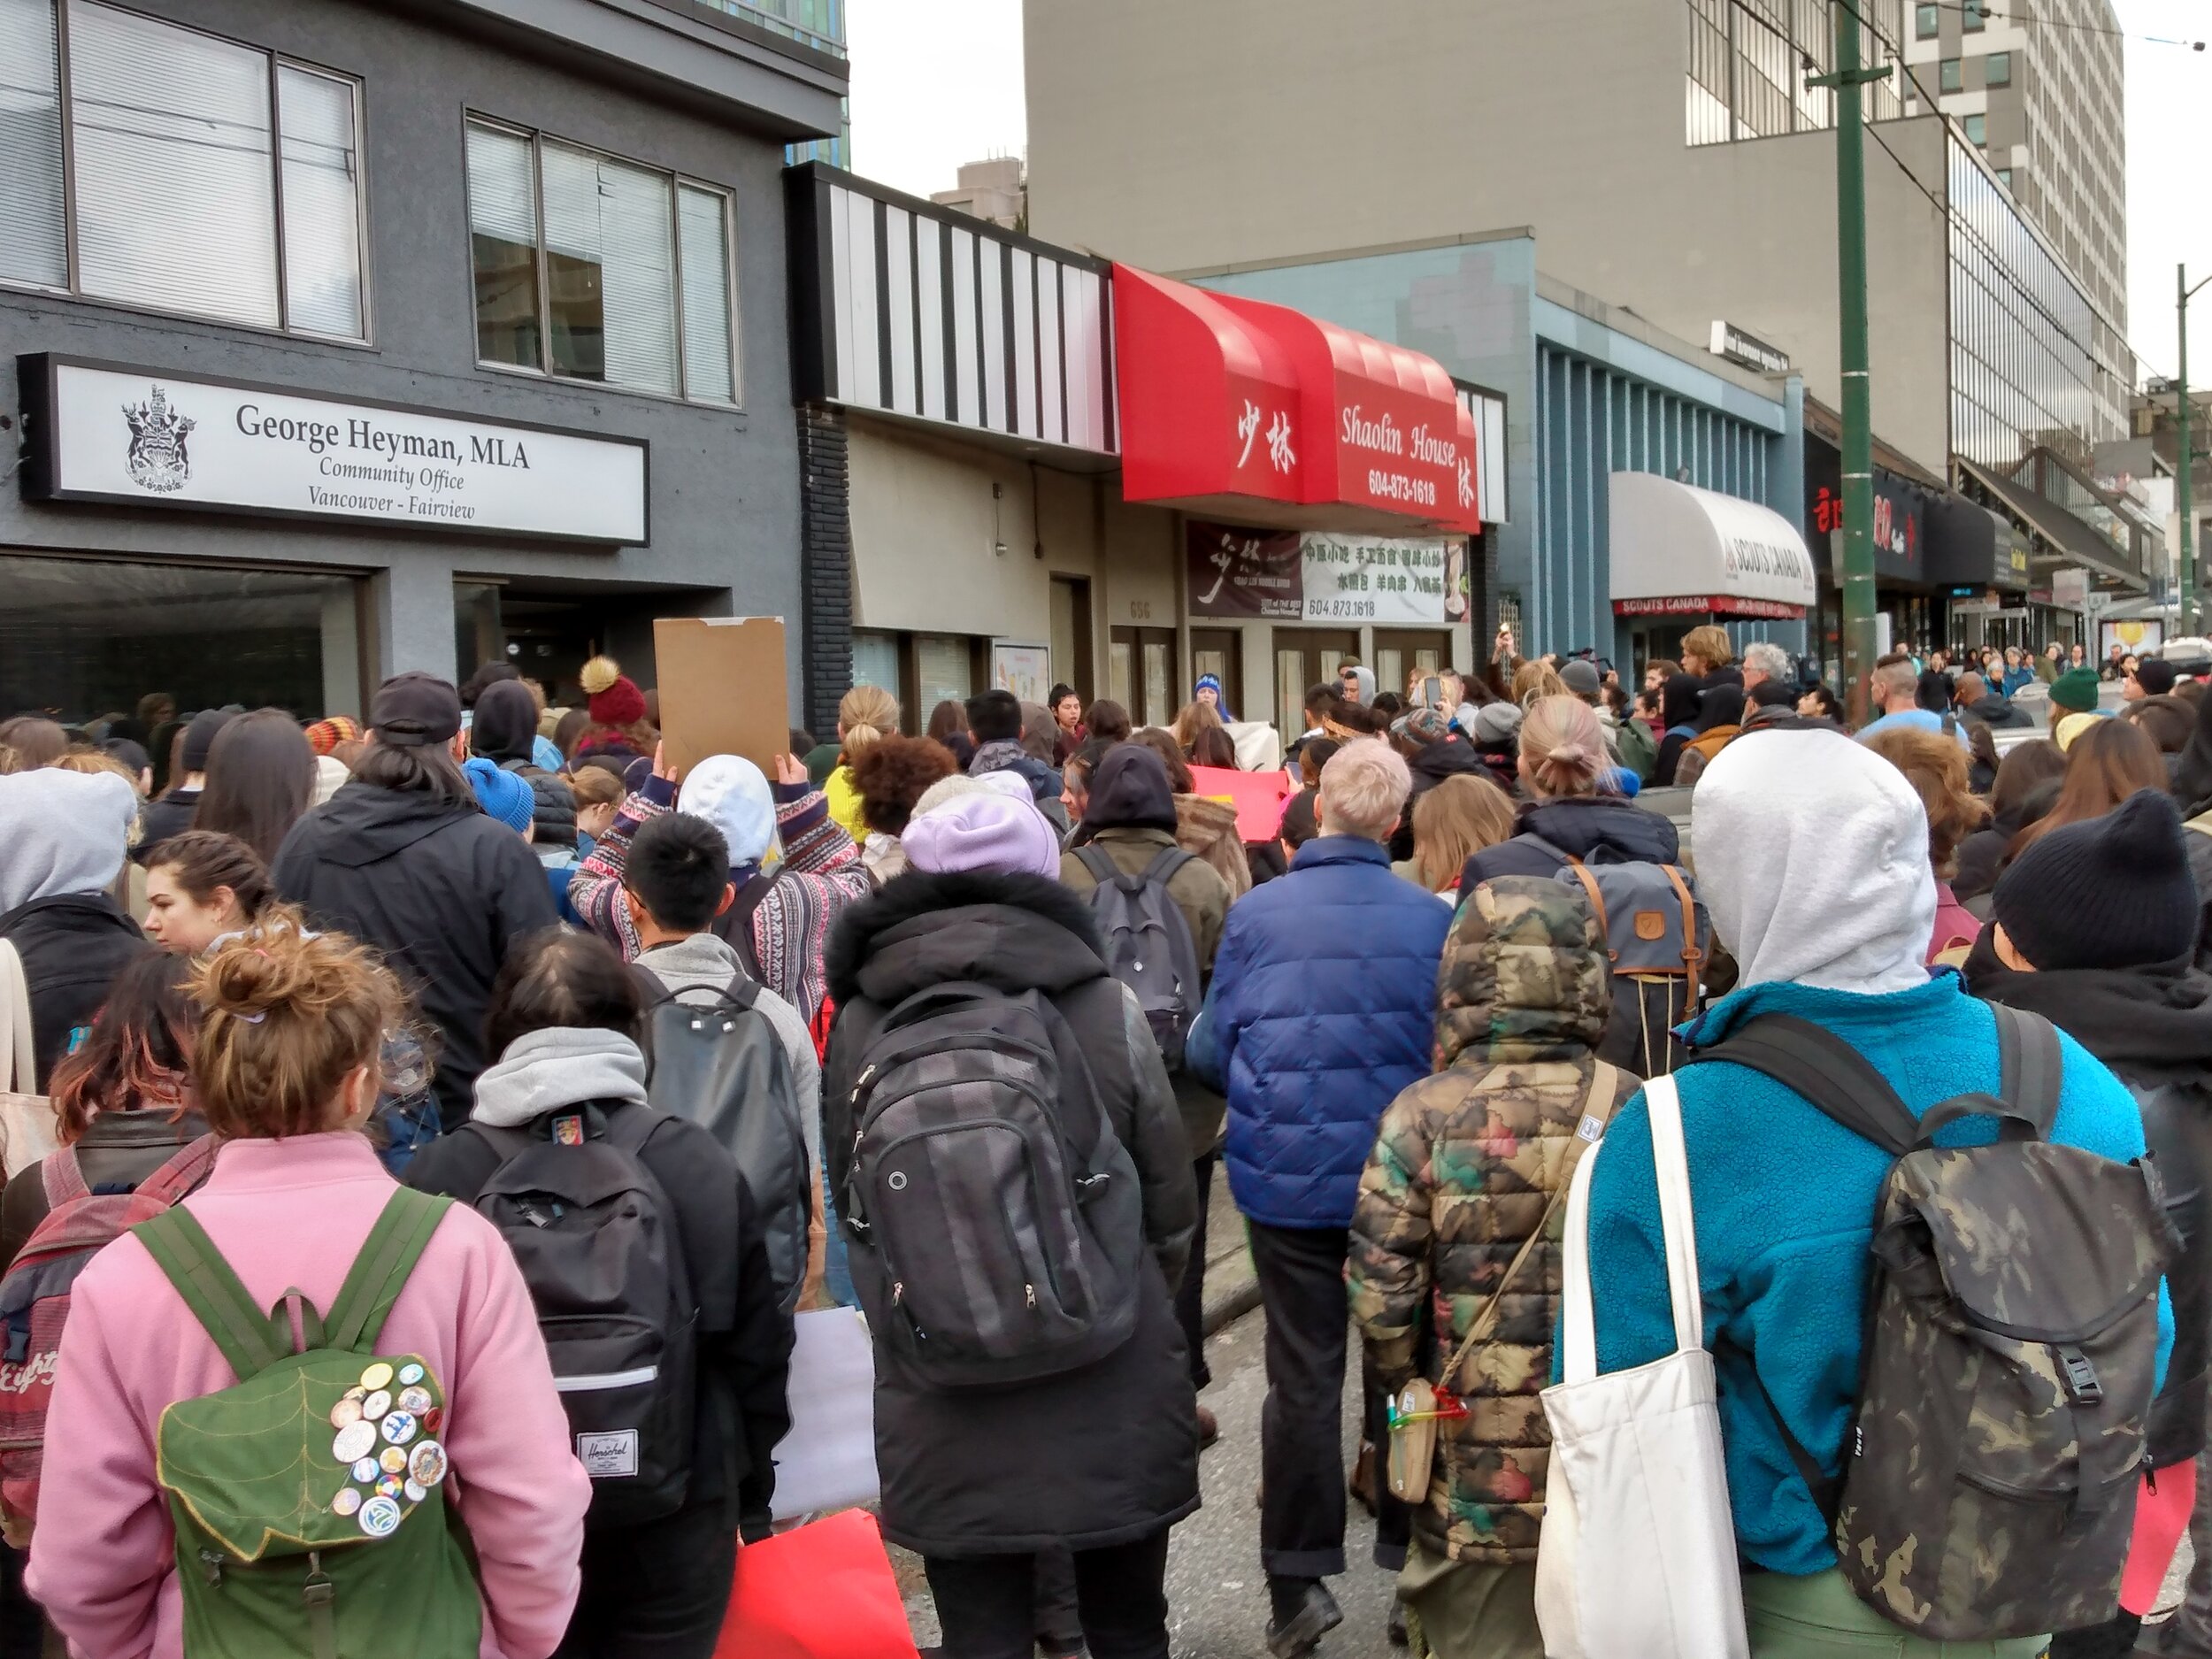 Student walkout, rally, and march in solidarity with Wet'suwet'en - Vancouver, Jan 2020 (2).jpg